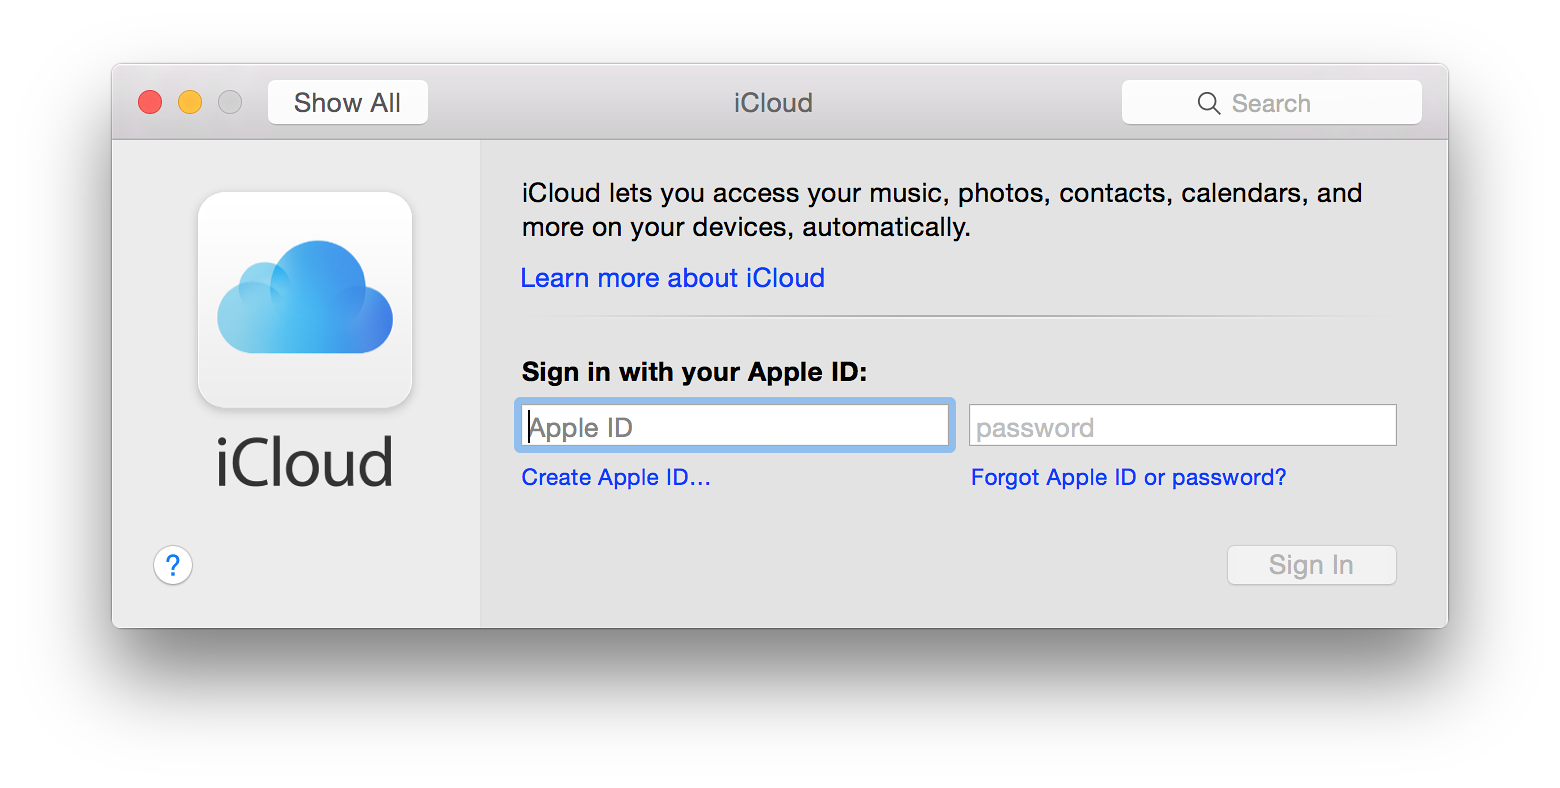 Web-Based iCloud Mail Redesign, Hide My Email, and Custom Domain Features  Now Live - MacRumors